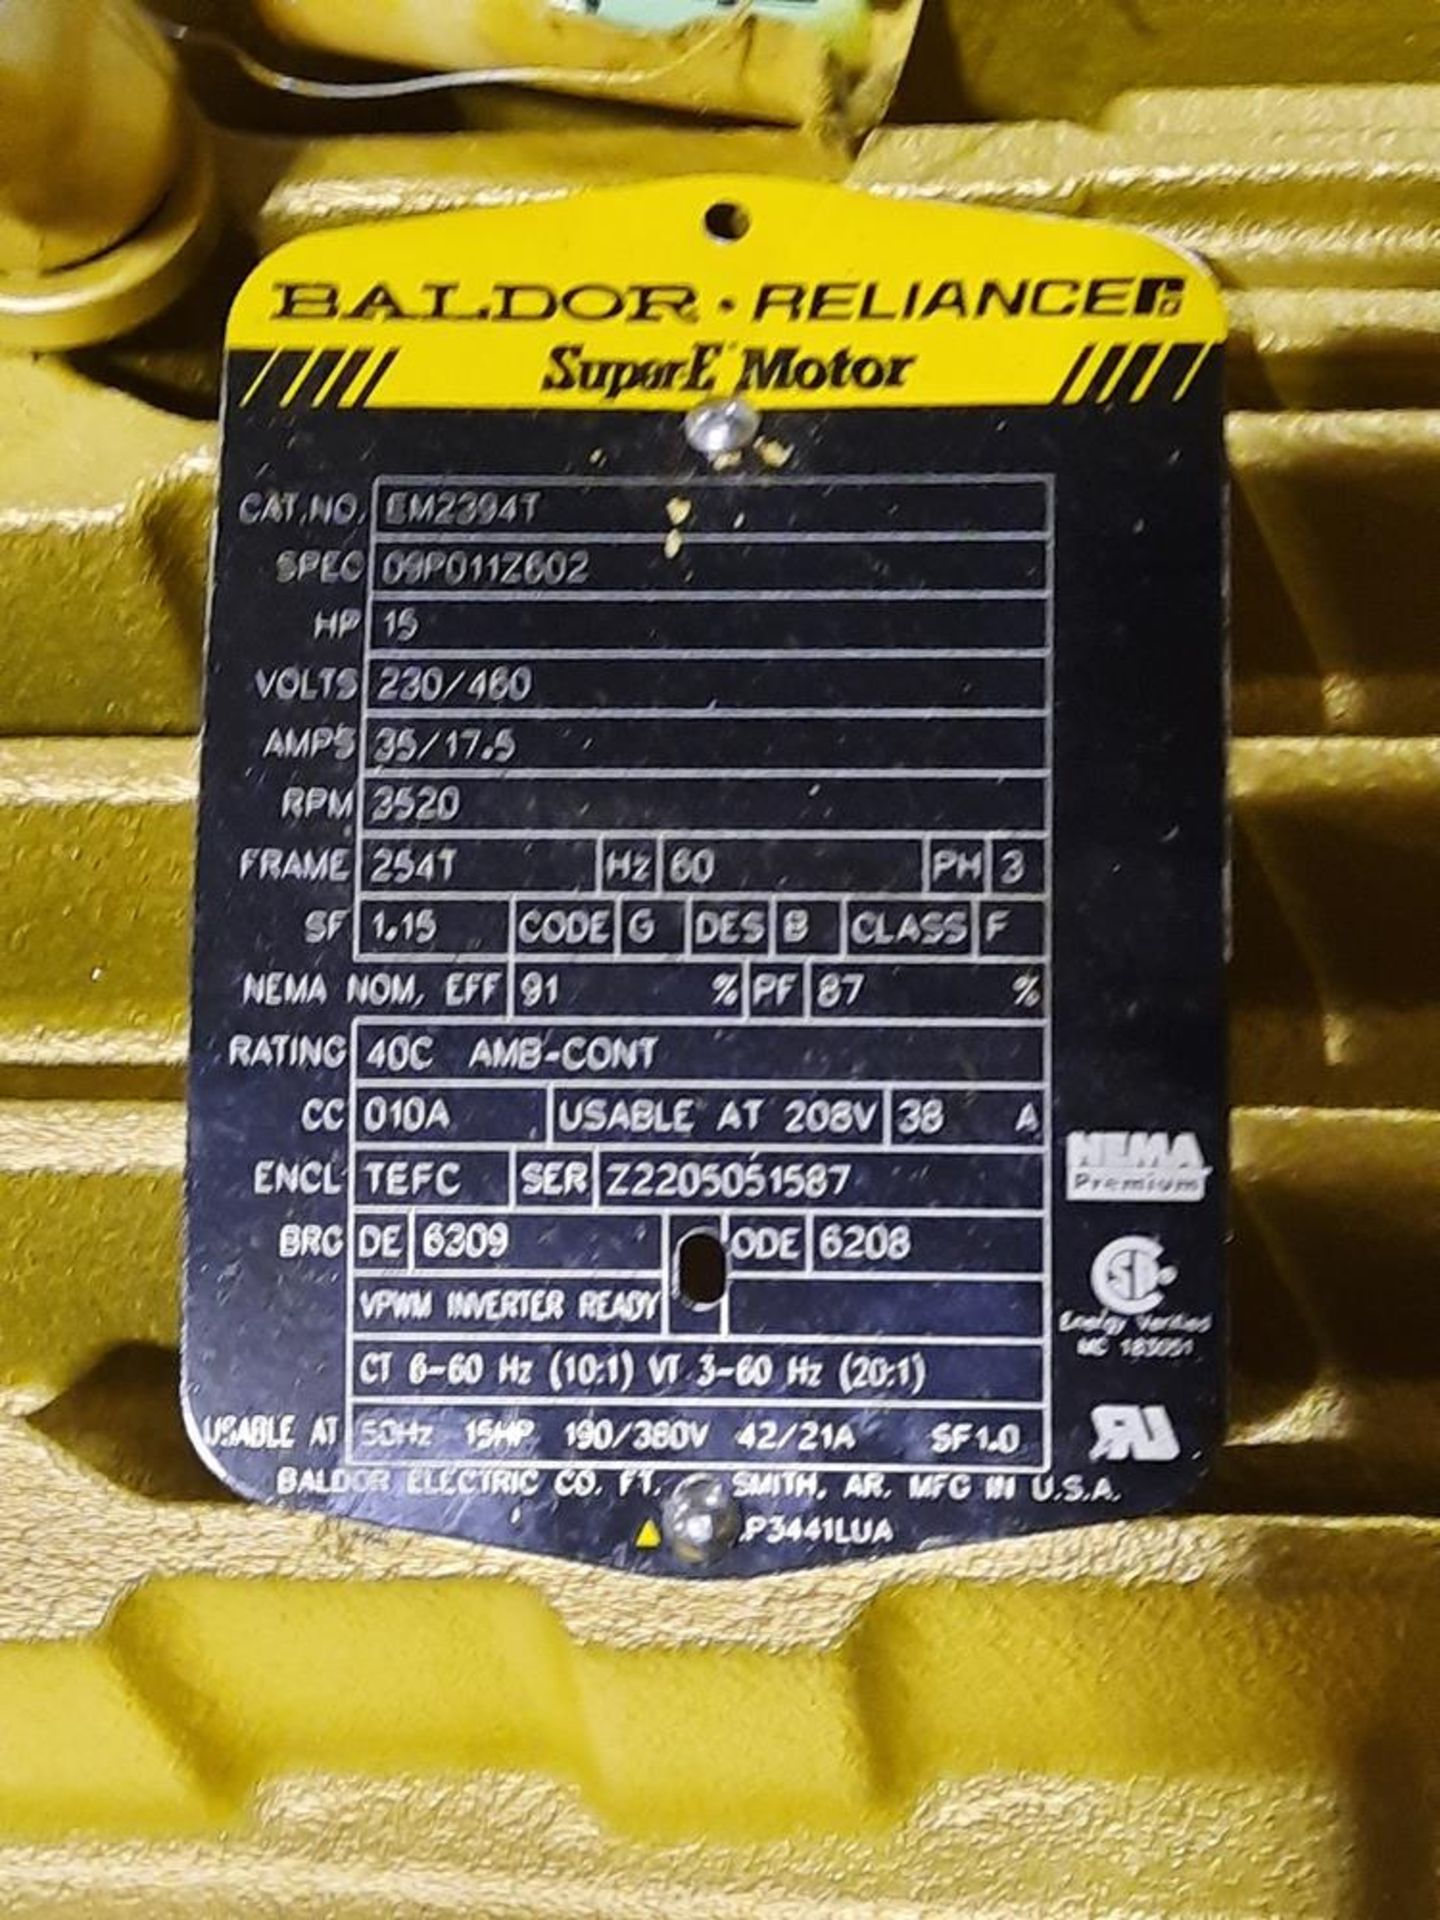 Baldor Motor, 15 h.p., 230/460 volts, 3520 rpm, 254T frame, 3 phase: Required Loading Fee $50.00, - Image 3 of 3